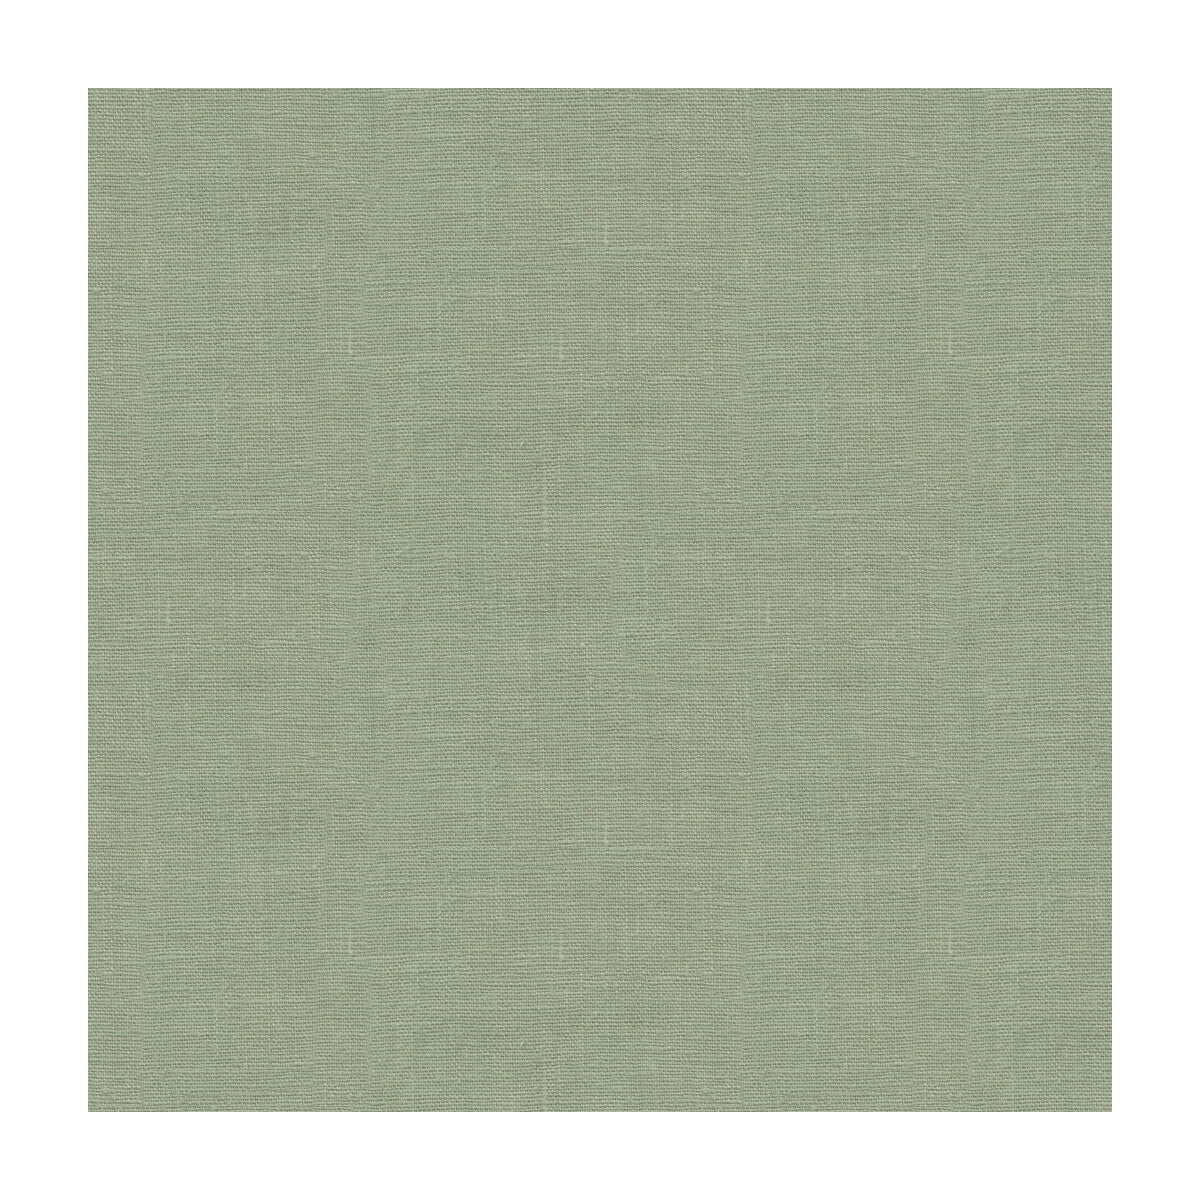 Dublin fabric in leaf color - pattern 32344.30.0 - by Kravet Basics in the Perfect Plains collection